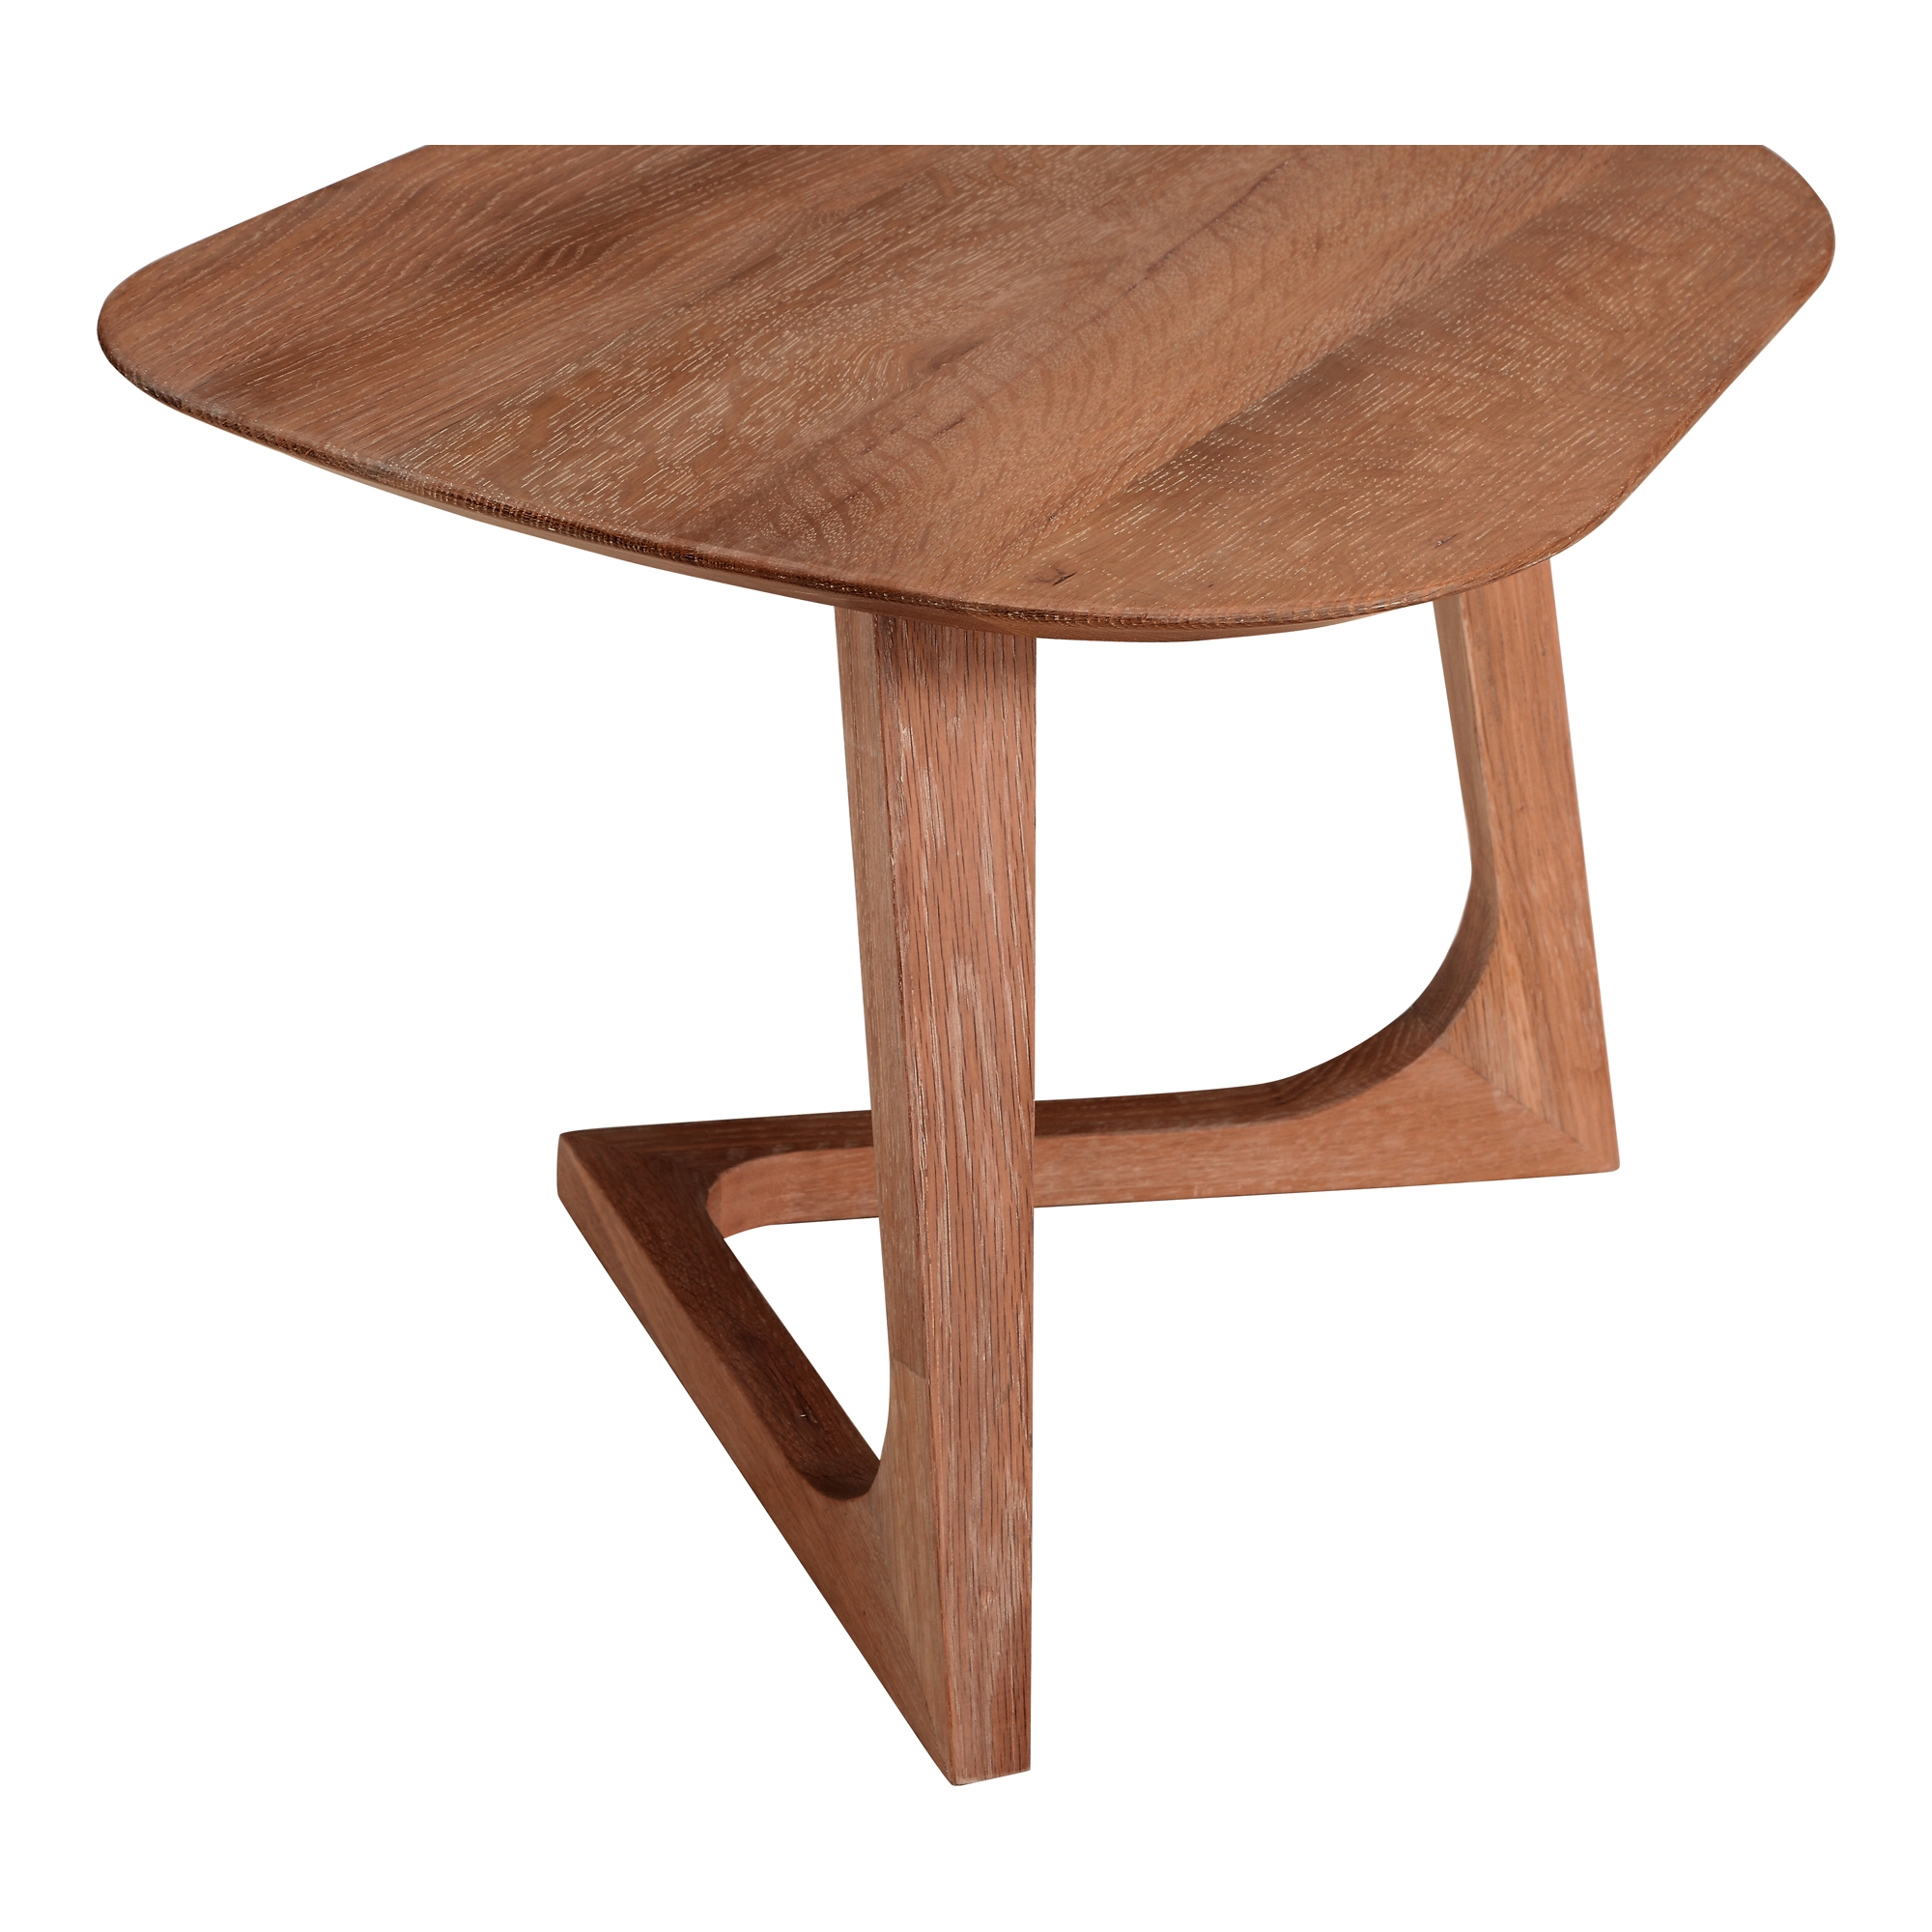 GODENZA END TABLE - Image 6